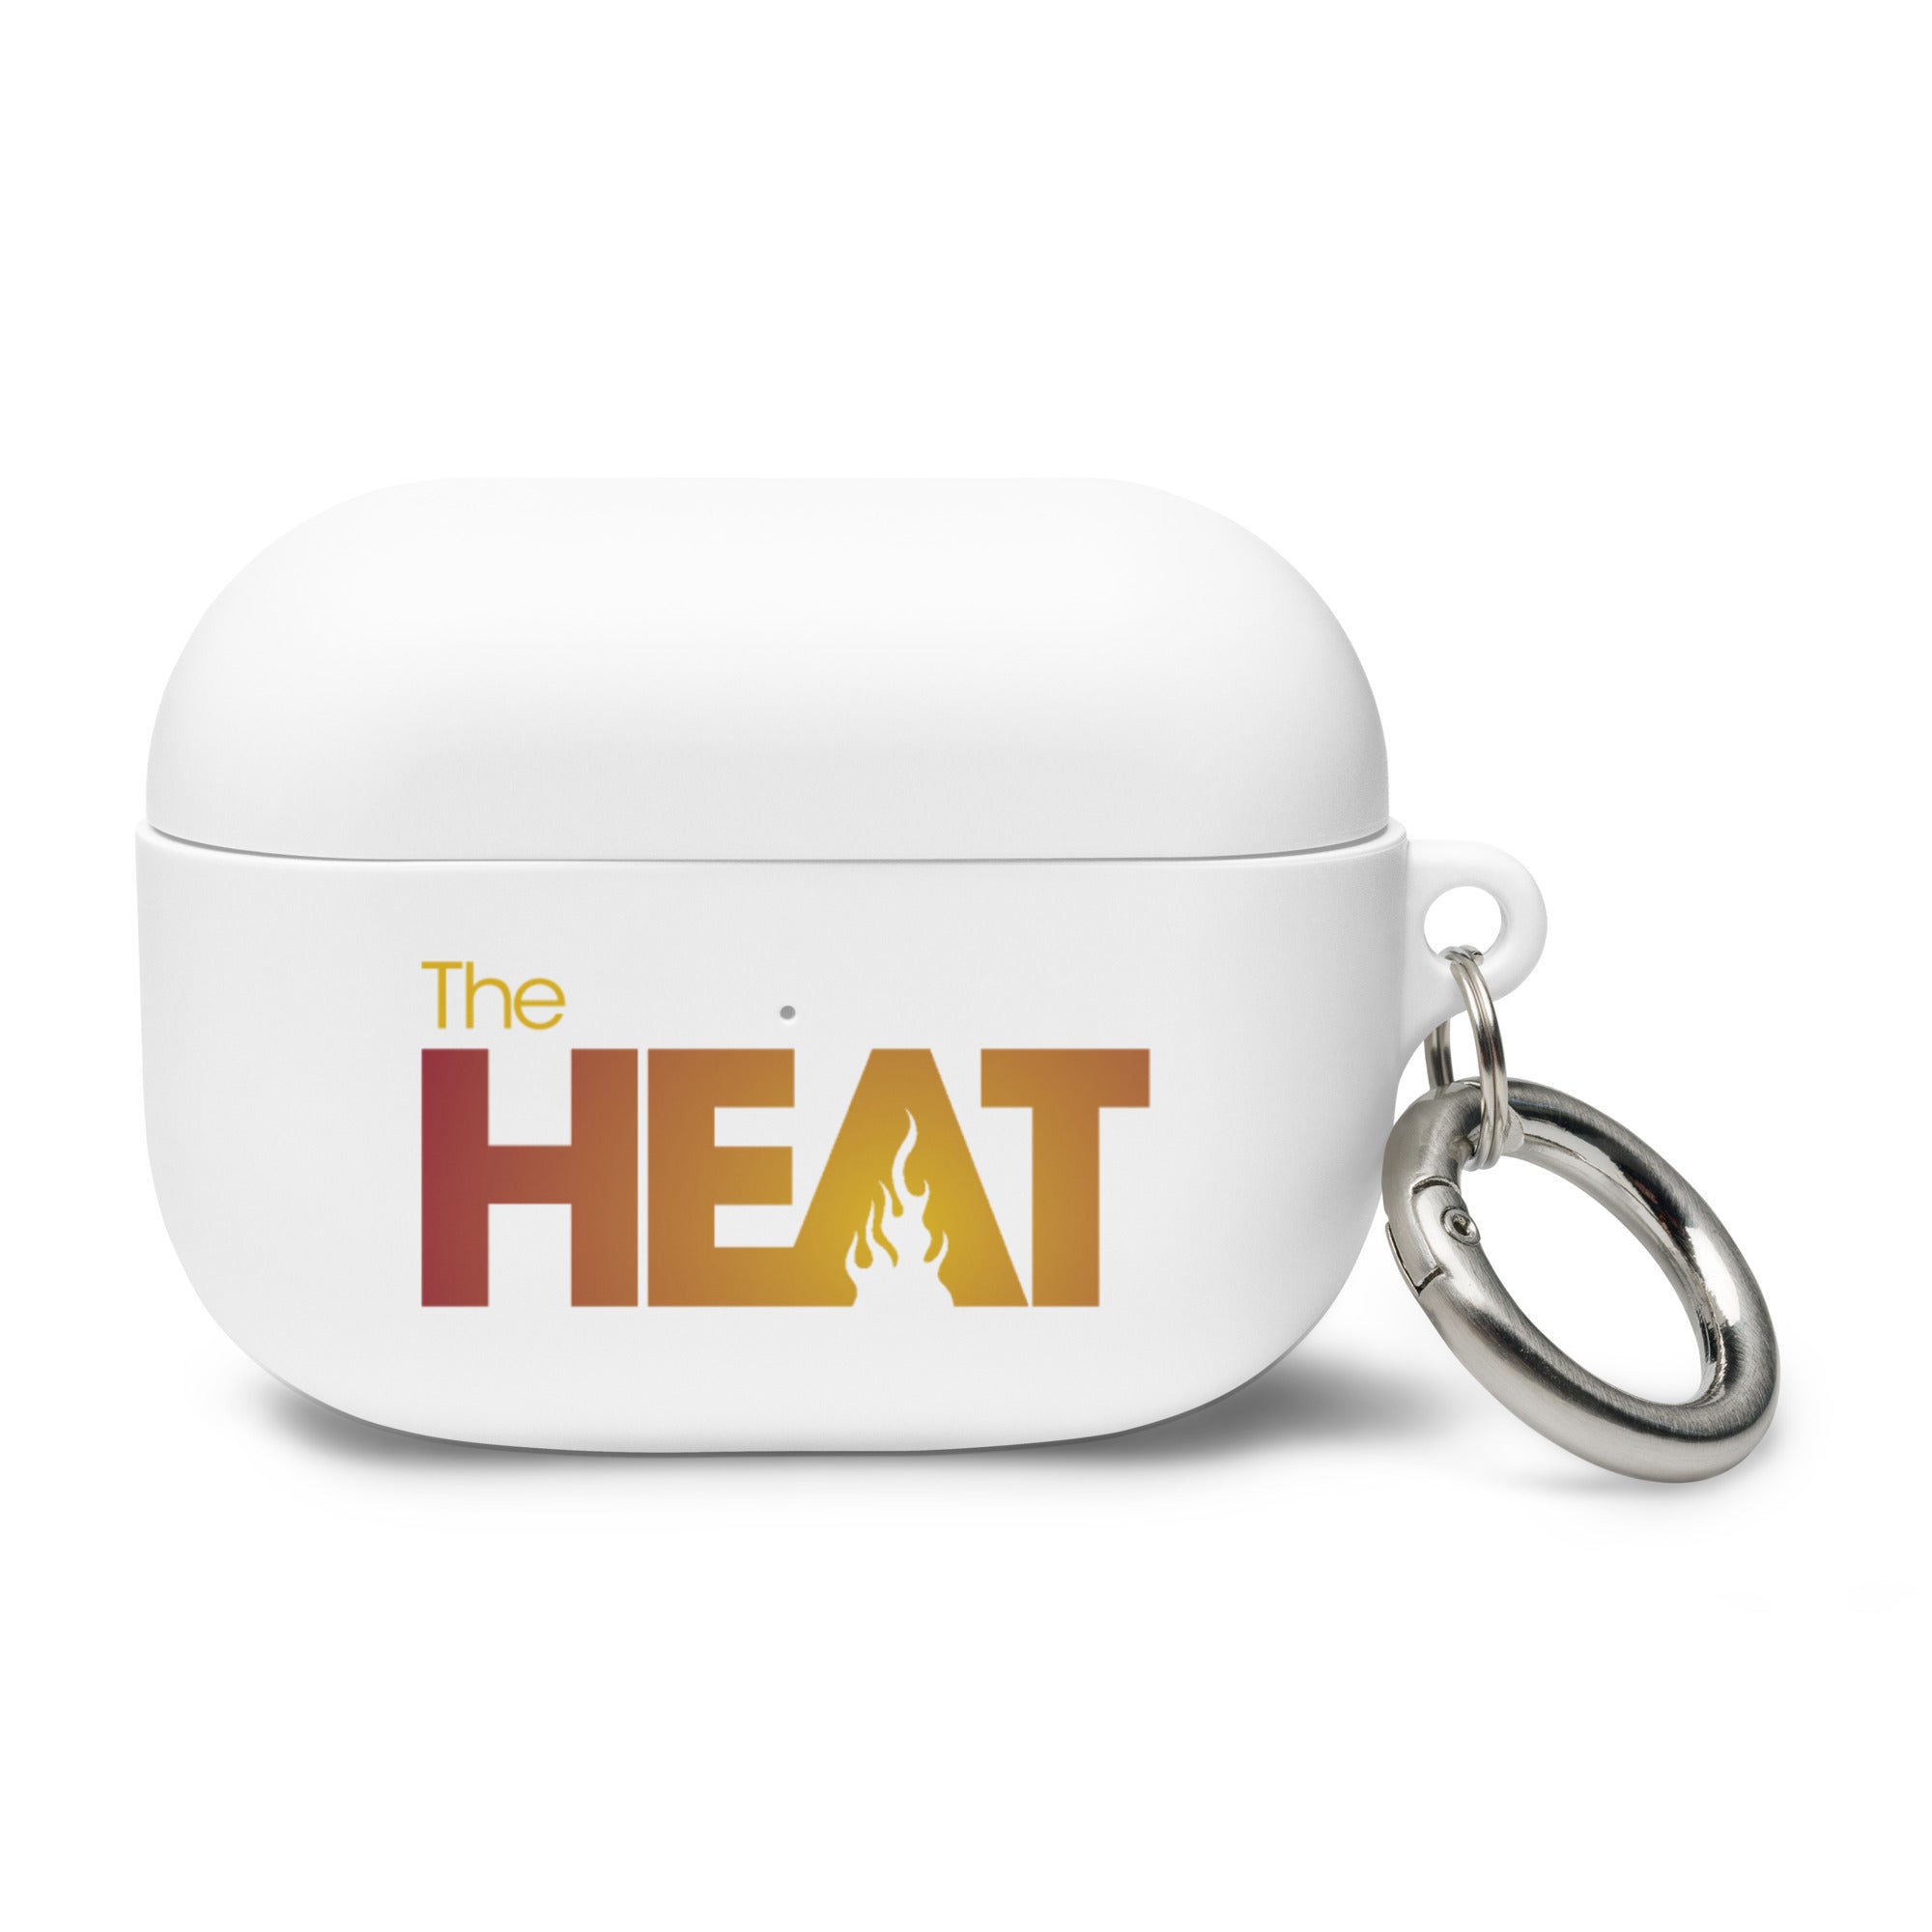 The Heat: AirPods® Case Cover